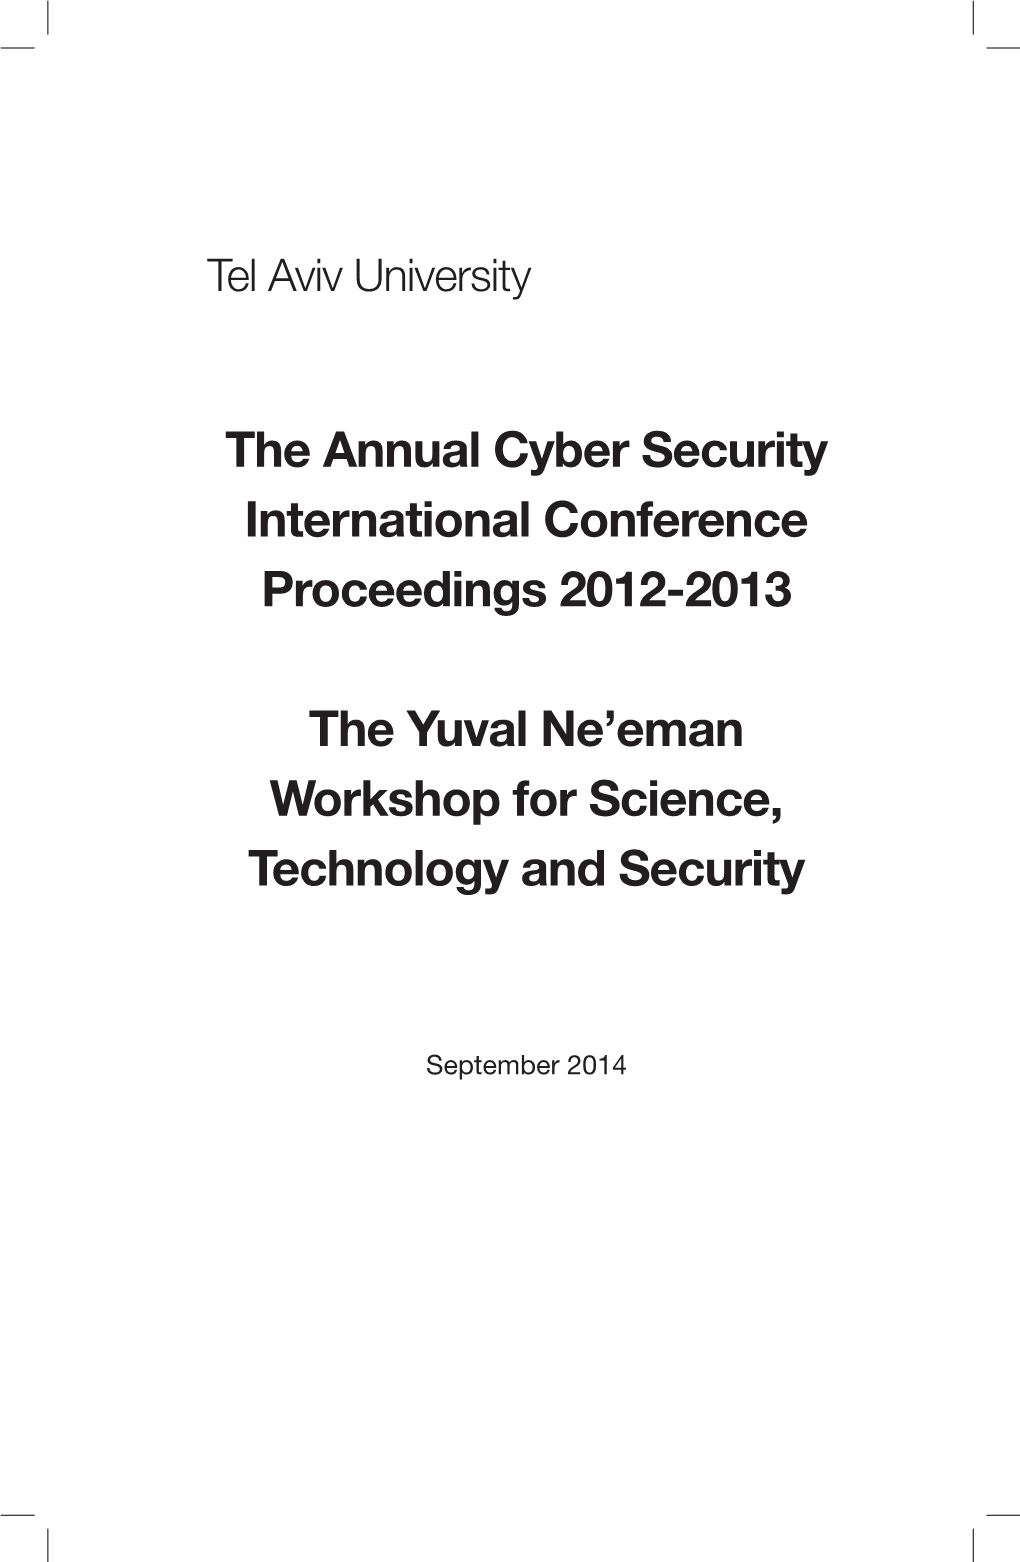 The Annual Cyber Security International Conference Proceedings 2012-2013 the Yuval Ne'eman Workshop for Science, Technology An